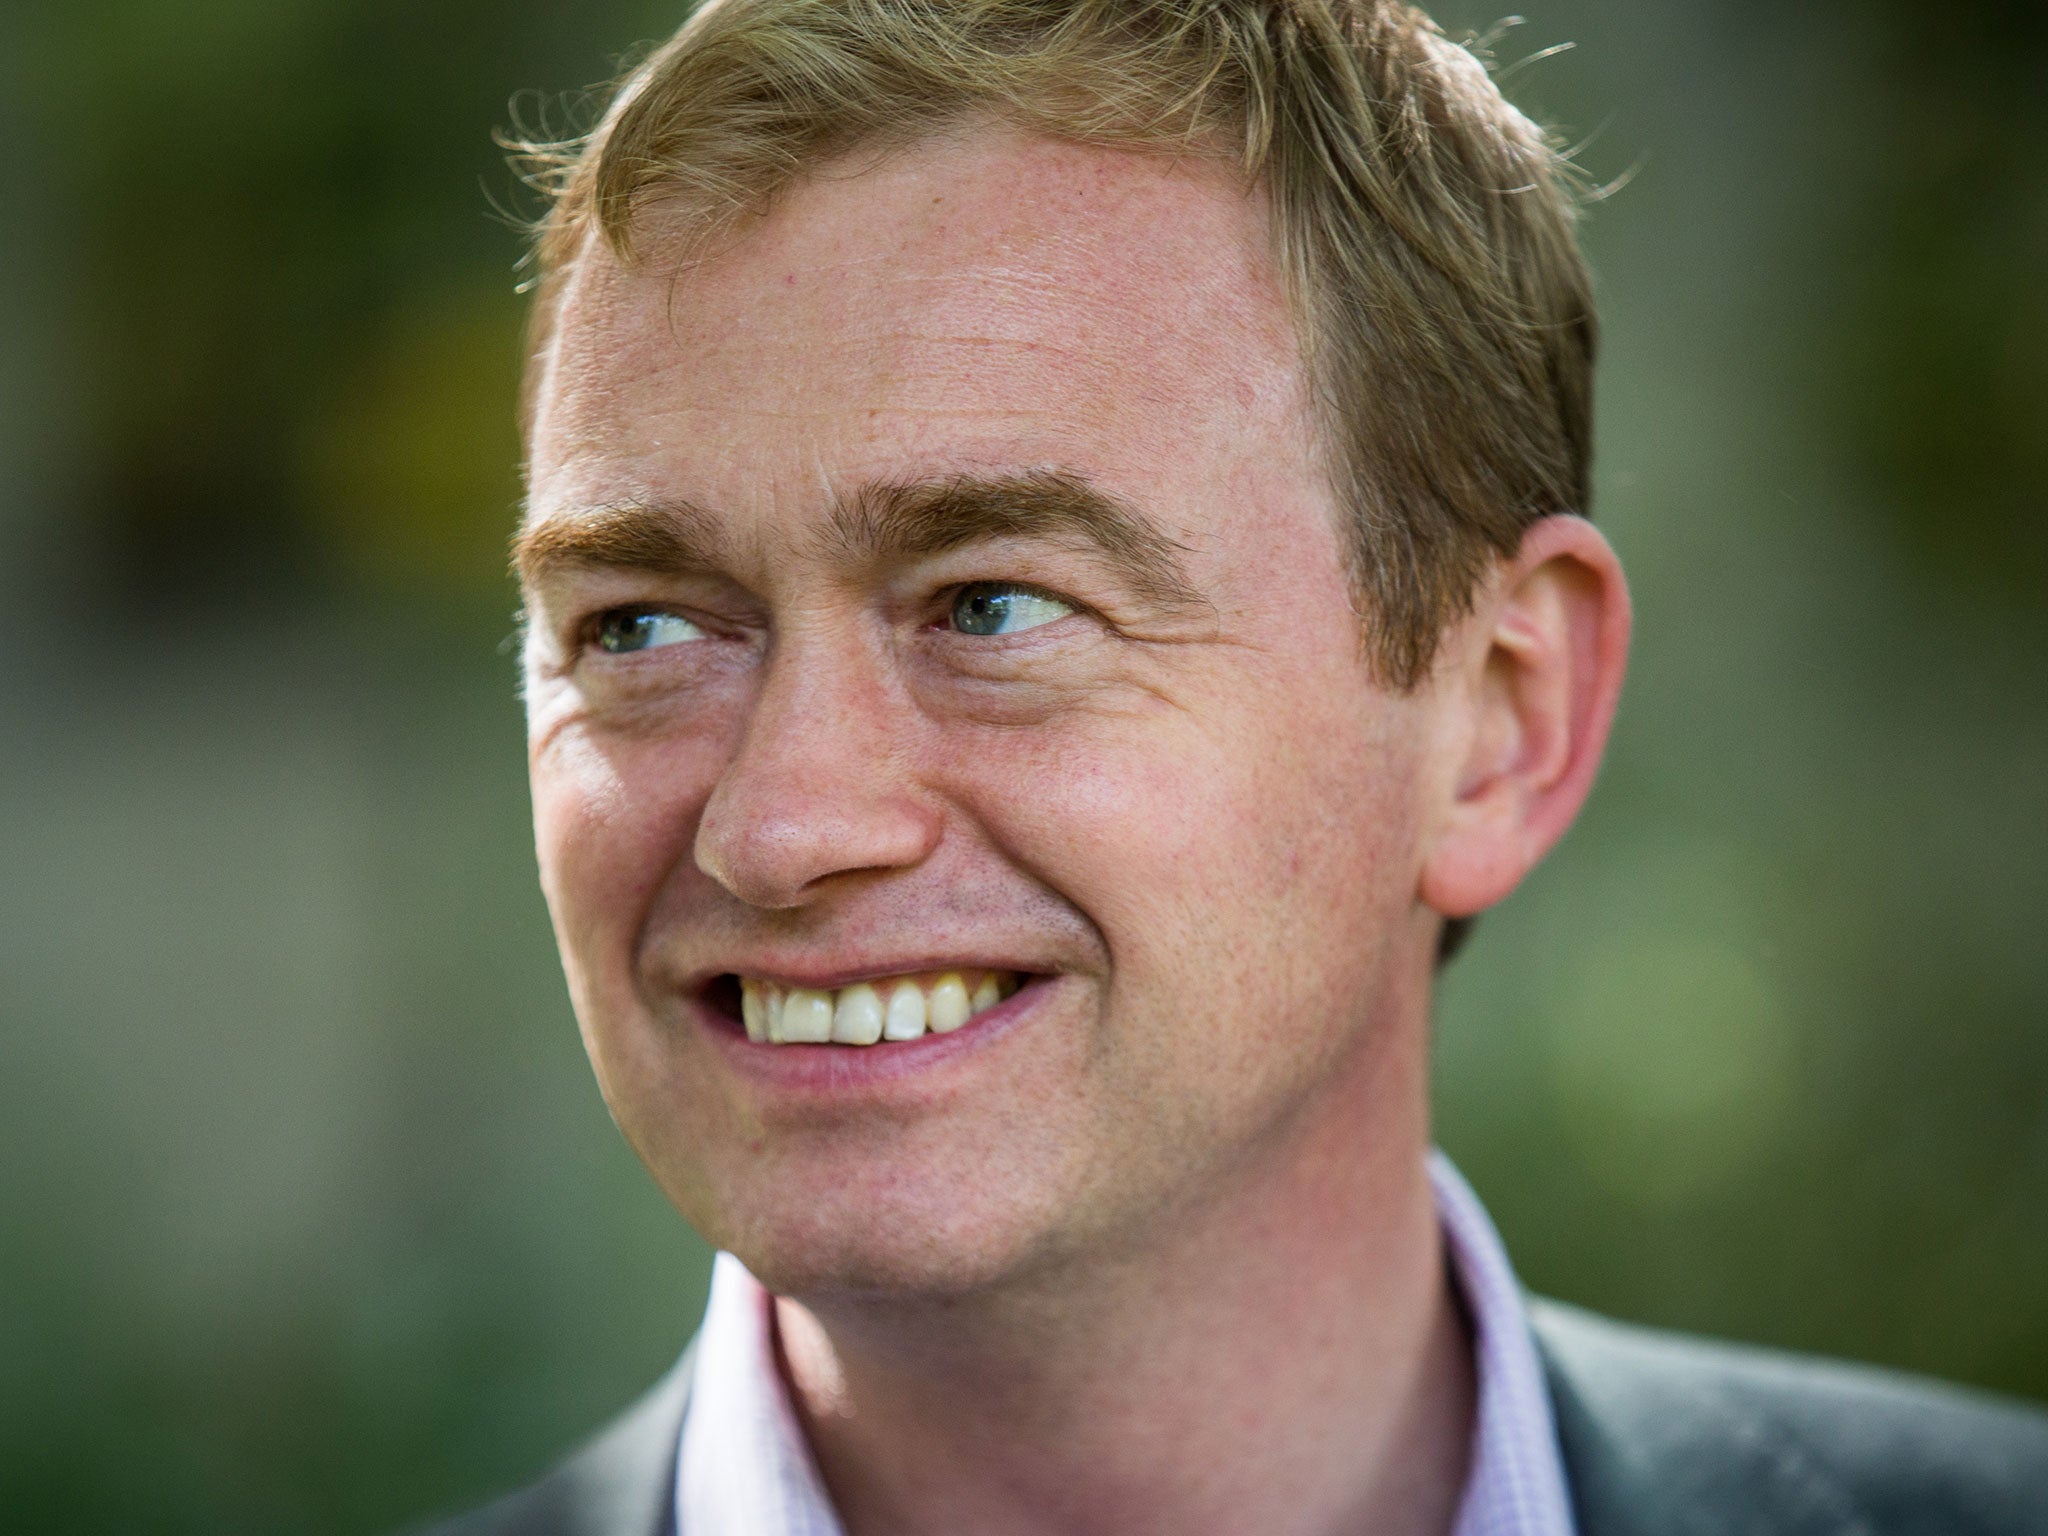 Two Liberal Democrat campaigners are alleged to have used party membership lists to conduct negative polling against Norman Lamb’s rival for the party leadership Tim Farron, pictured